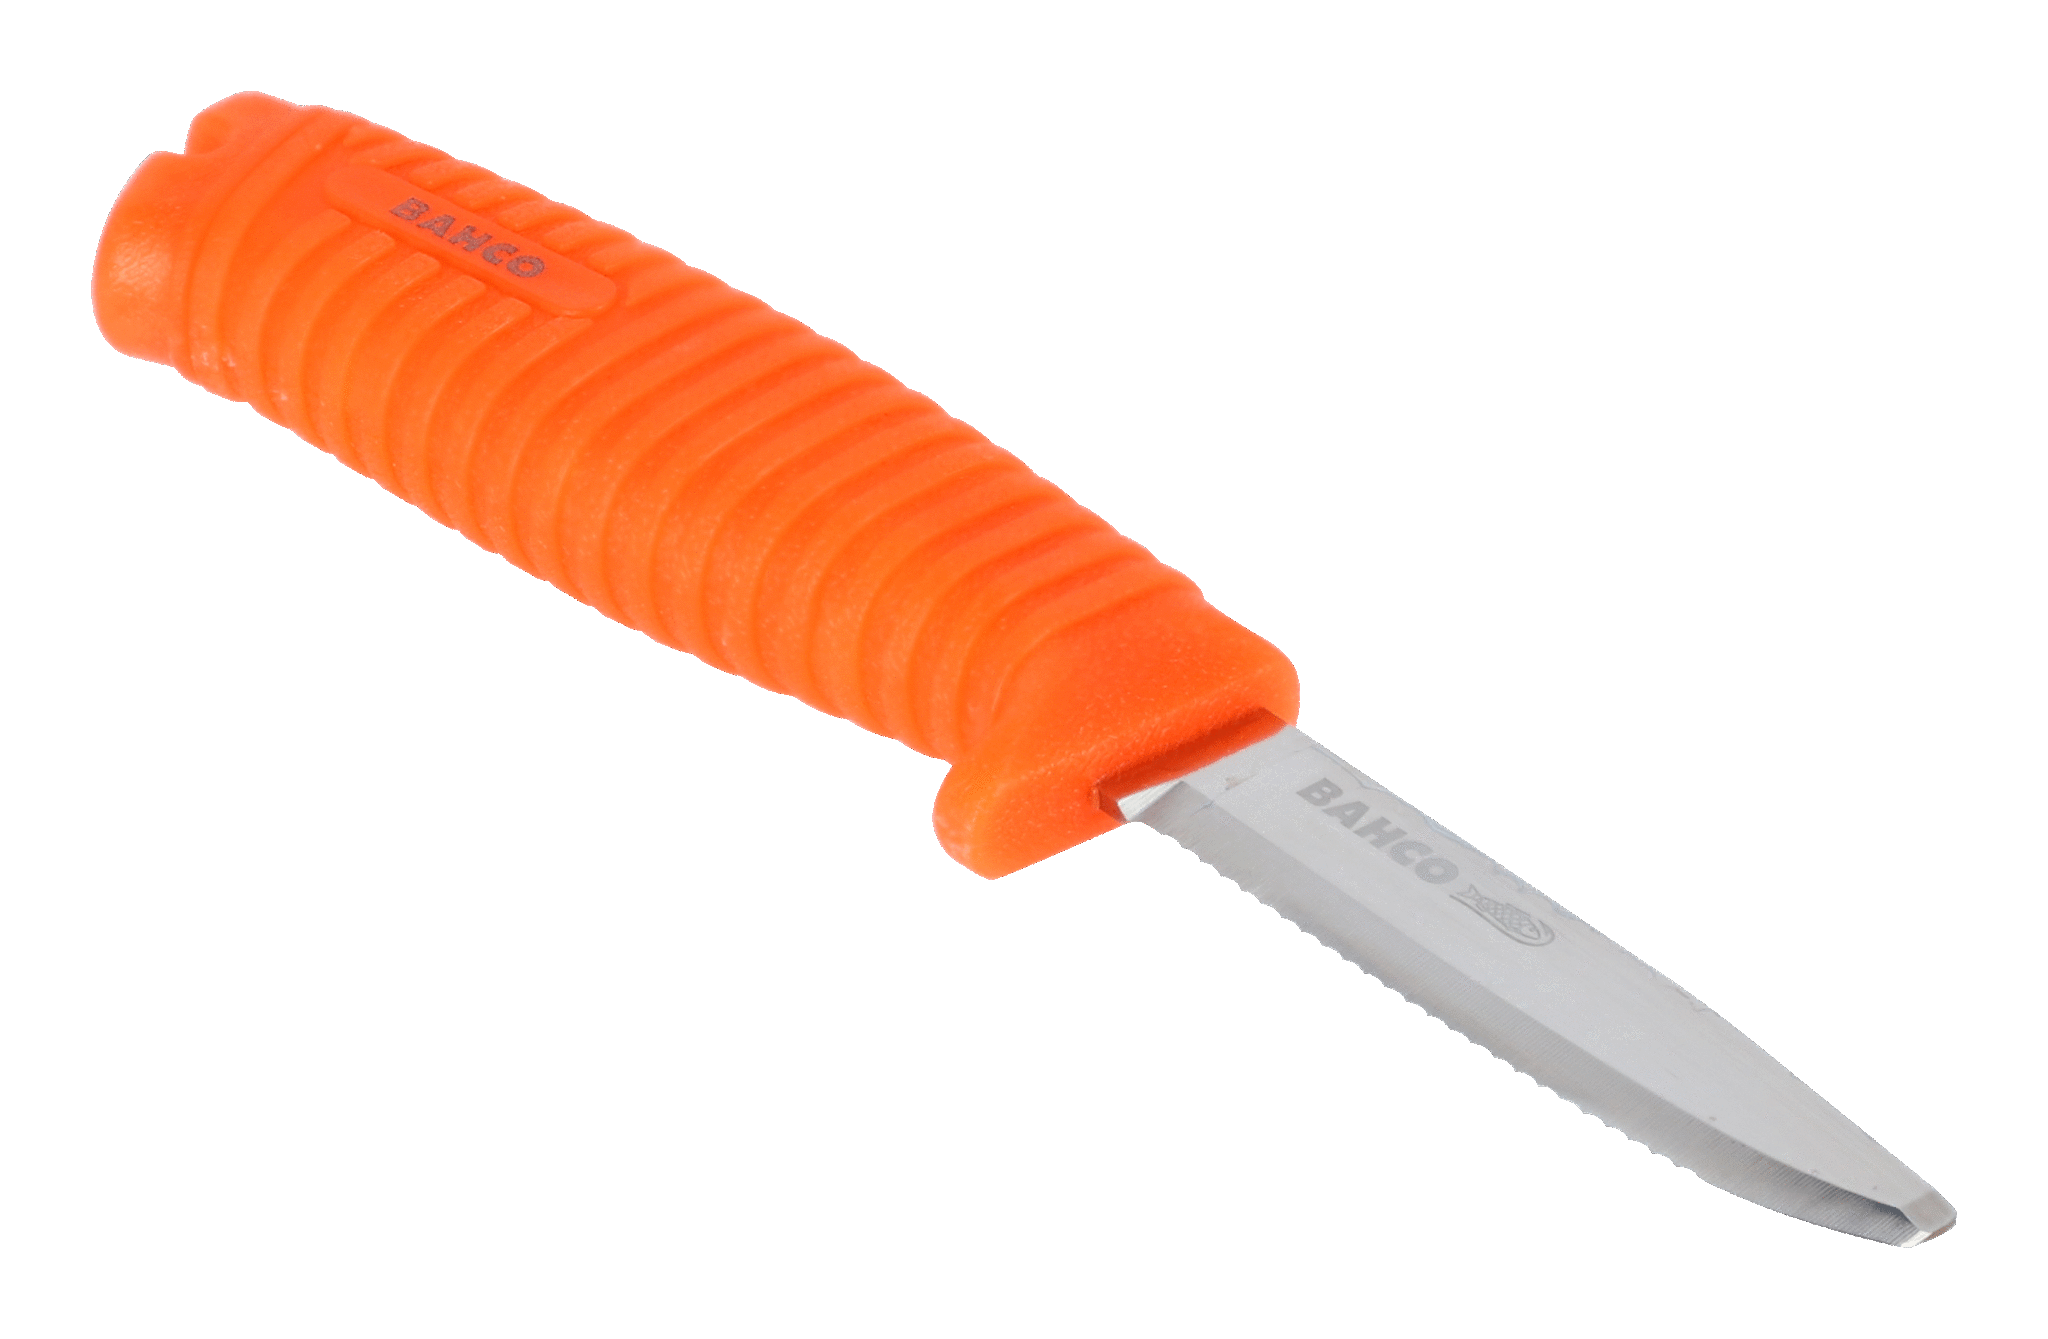 Rescue floating knife with fluorescent handle